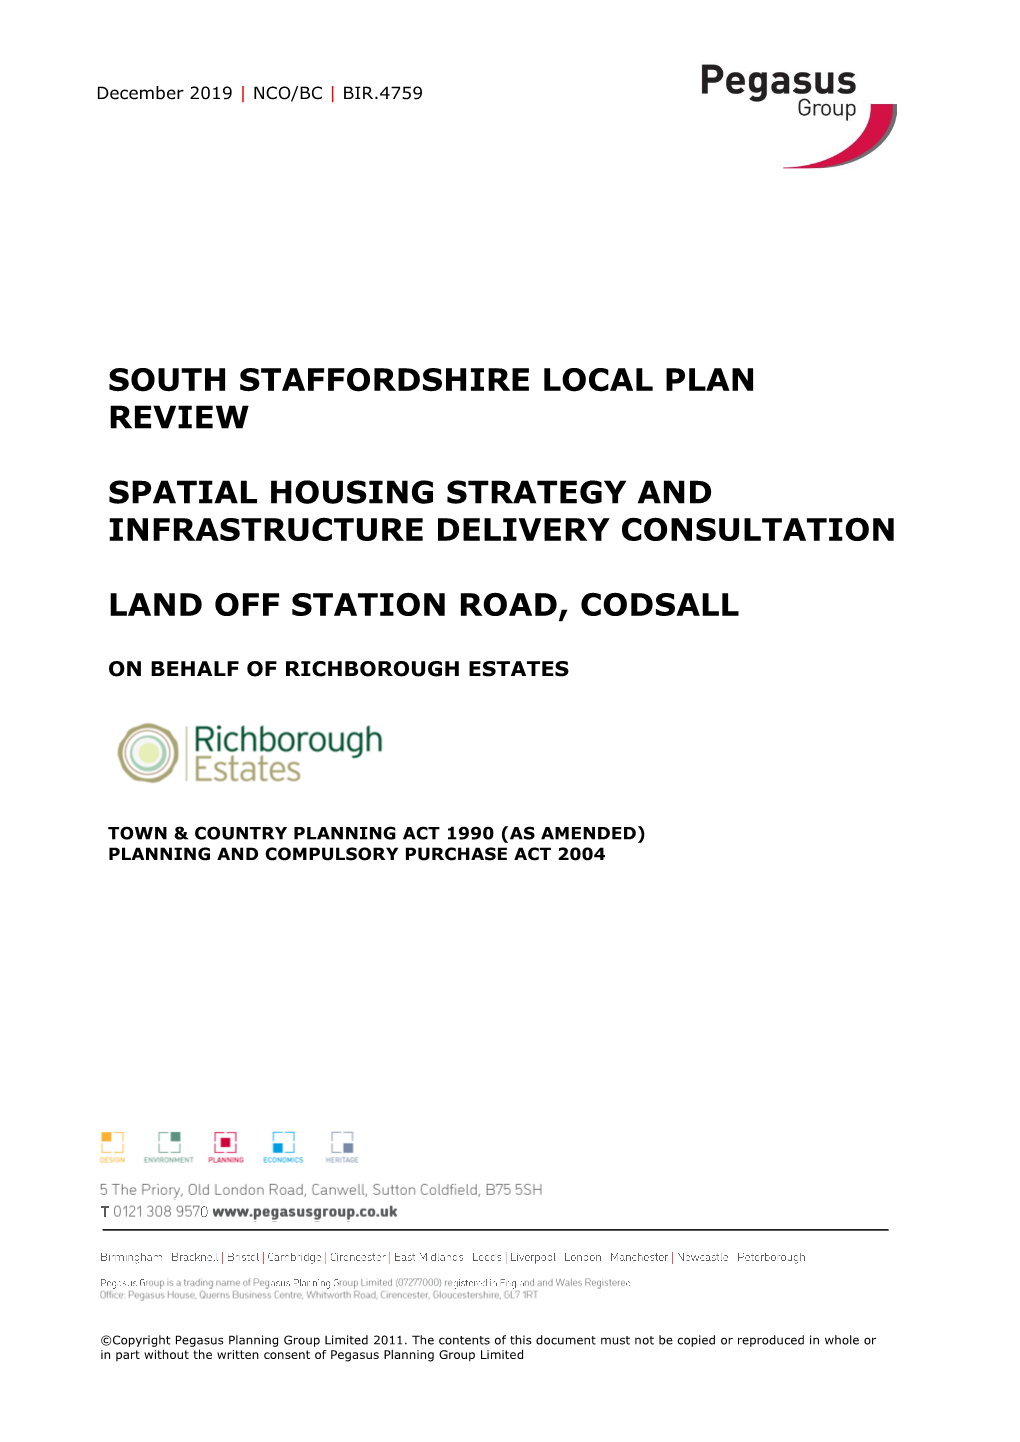 South Staffordshire Local Plan Review Spatial Housing Strategy and Infrastructure Delivery Consultation Land Off Station Road, Codsall